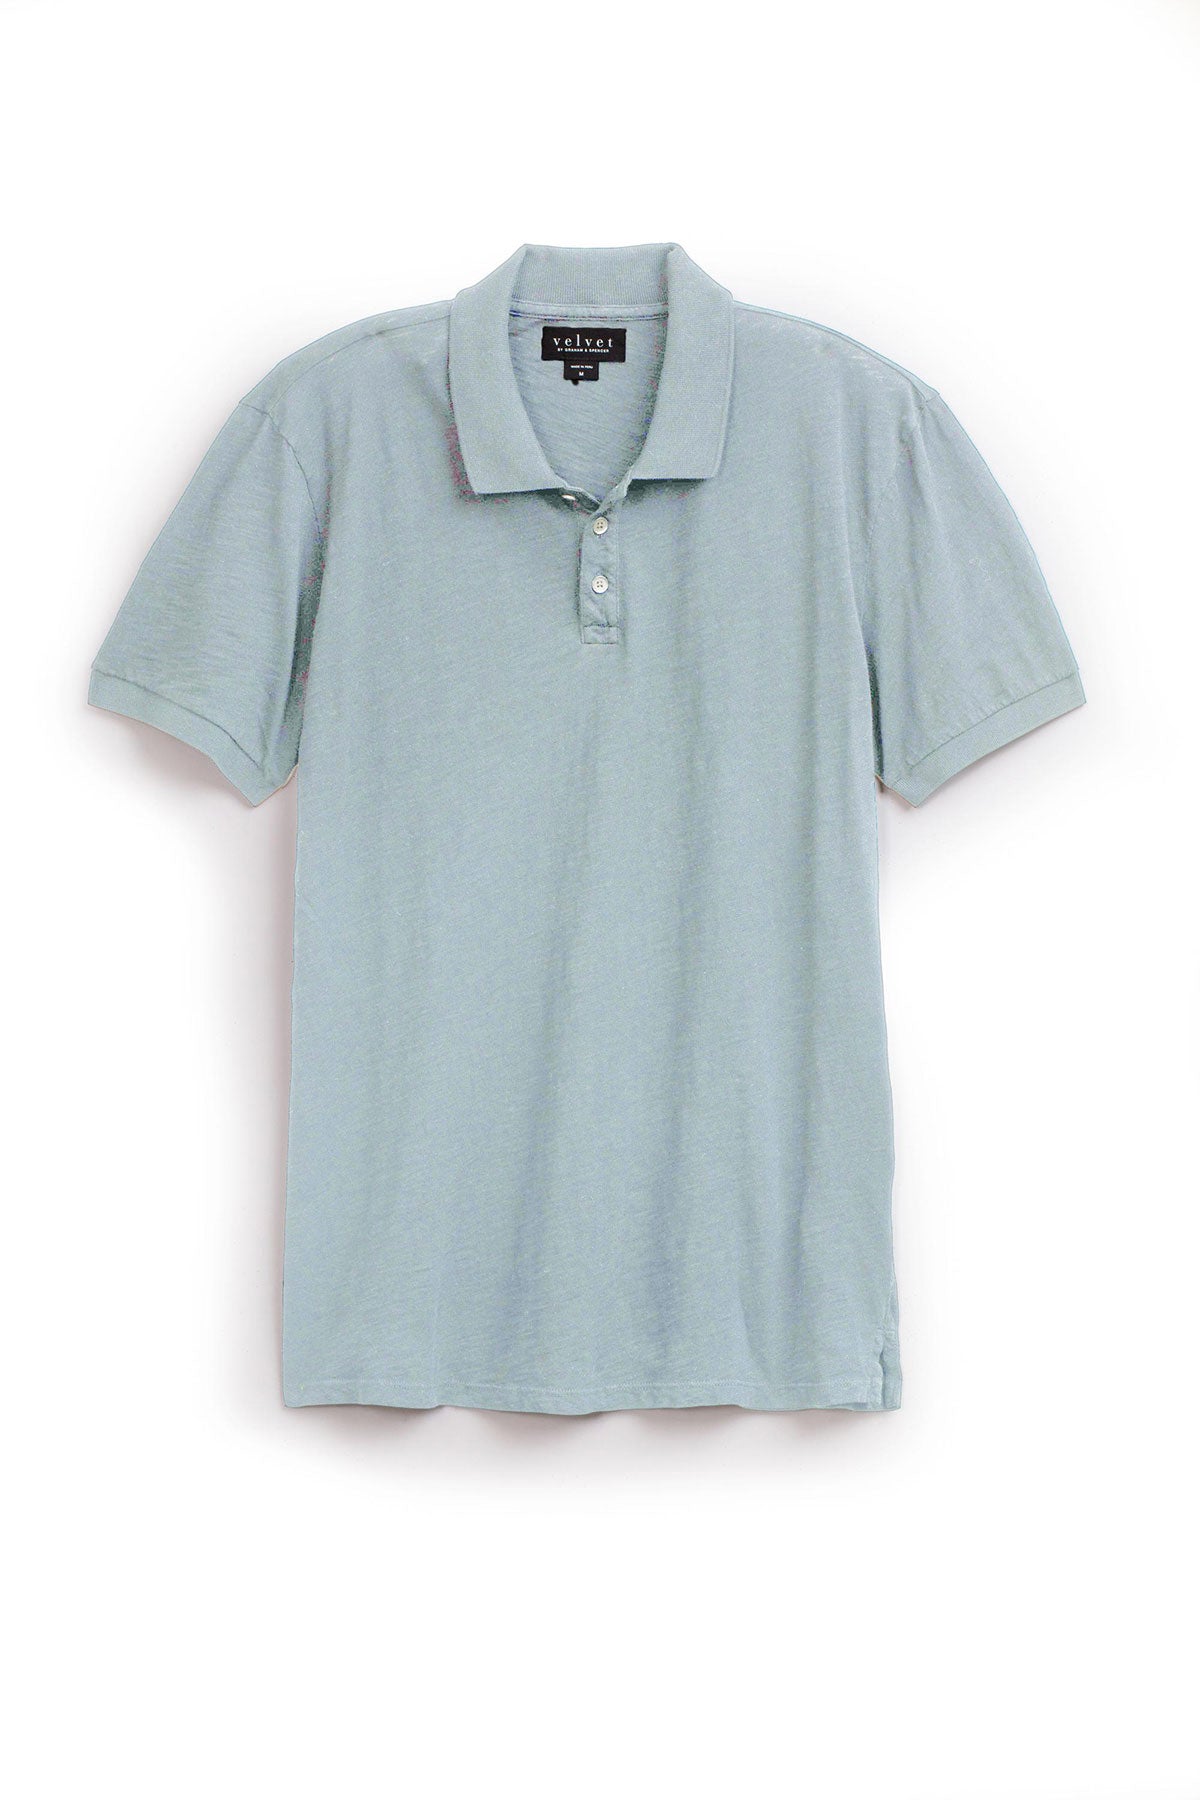 A NIKO POLO by Velvet by Graham & Spencer, a cotton slub polo shirt with a vintage-feel hand silhouette, hanging on a white background.-35783018053825